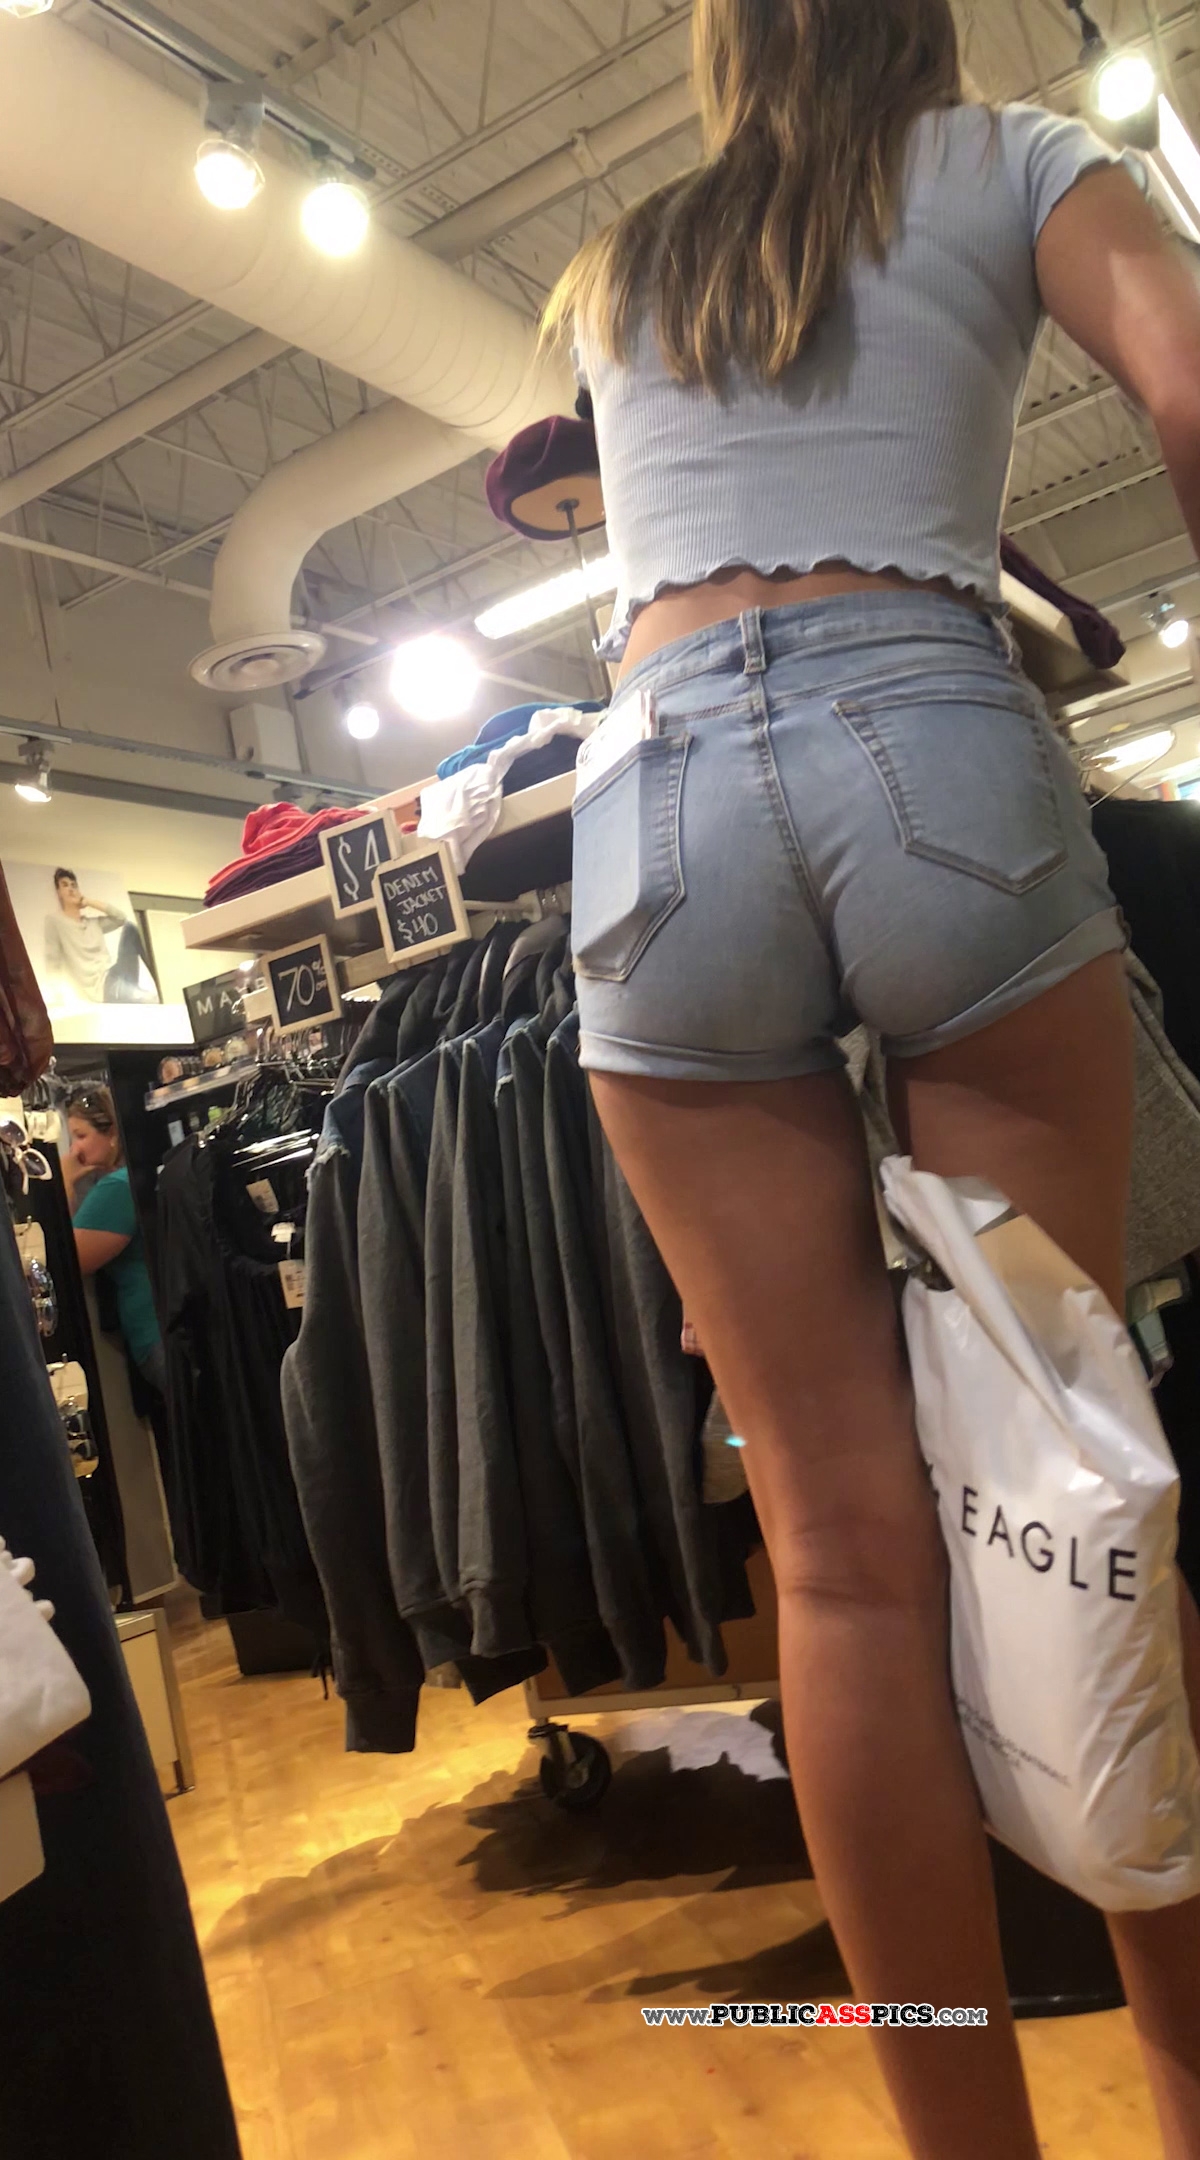 Simply perfect young ass in shorts got caught by voyeur – Public Ass Pics